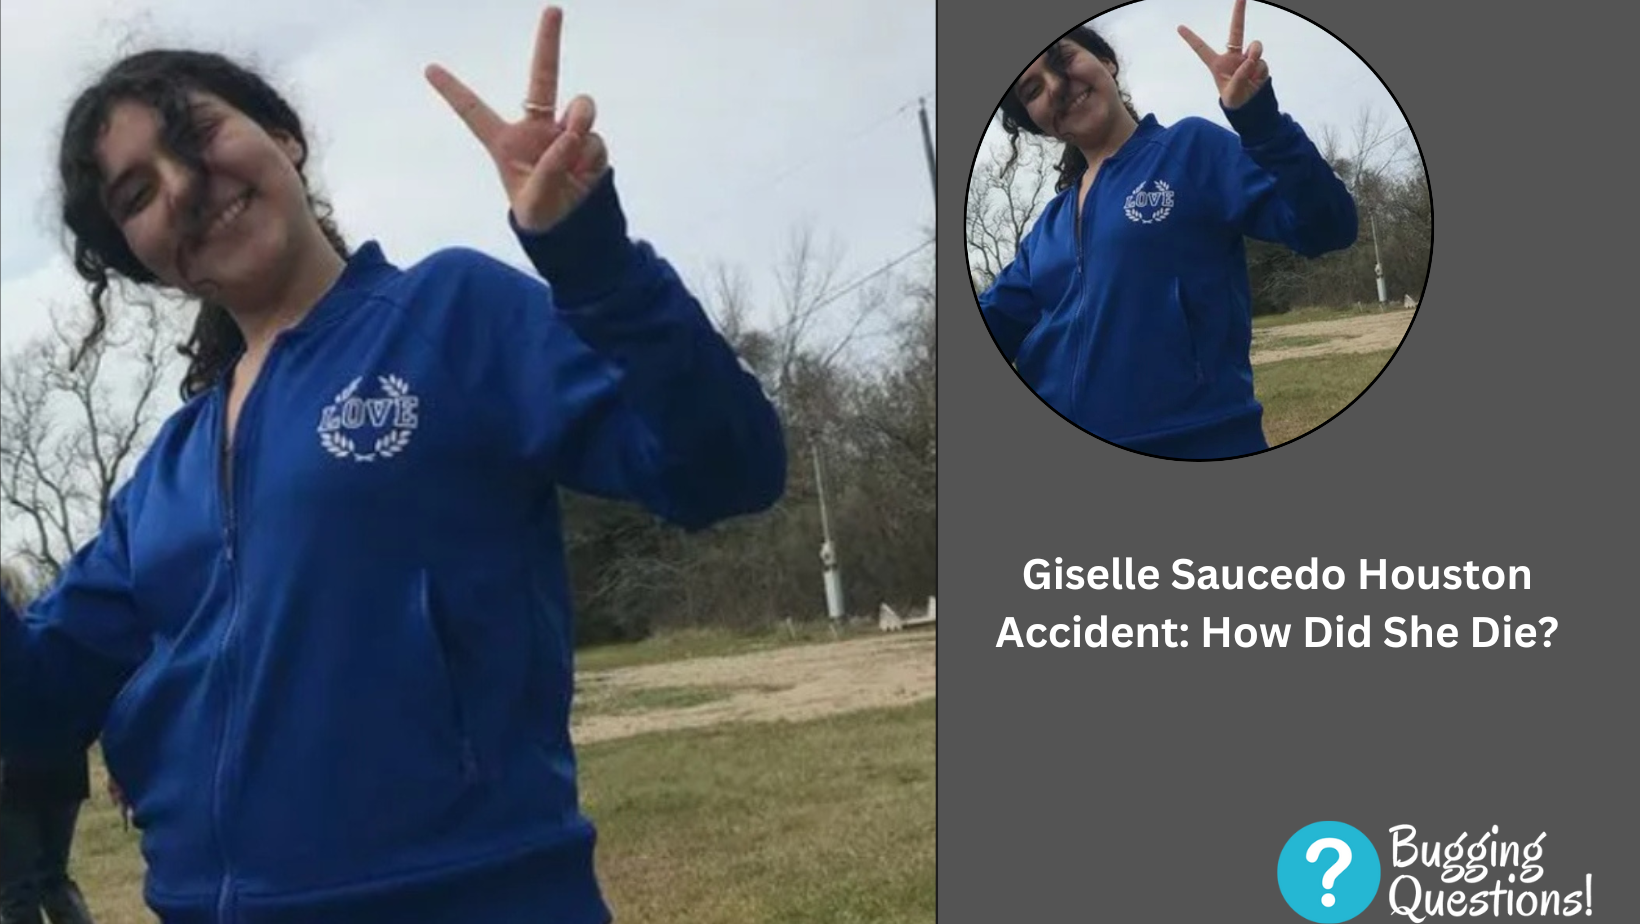 Giselle Saucedo Houston Accident: How Did She Die?